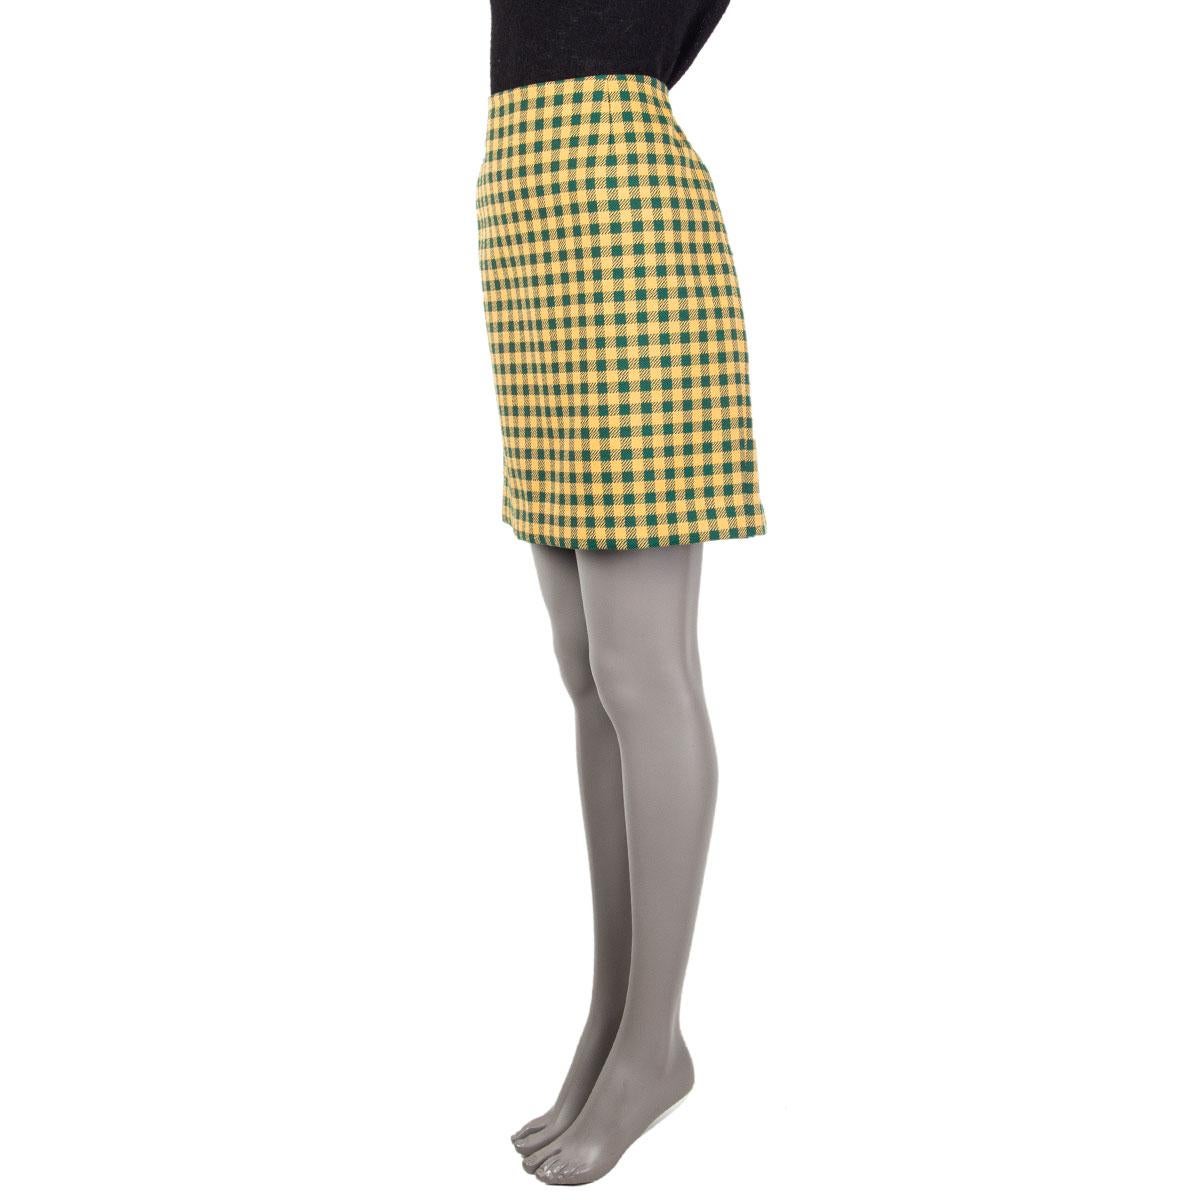 Prada gingham skirt in mustard and green wool (55%), polyester (44%) and nylon (1%). Comes with a short slit on the back. Unlined. Opens with a zipper on the side. Has been worn and is in excellent condition.

Tag Size 48
Size XXL
Waist 88cm